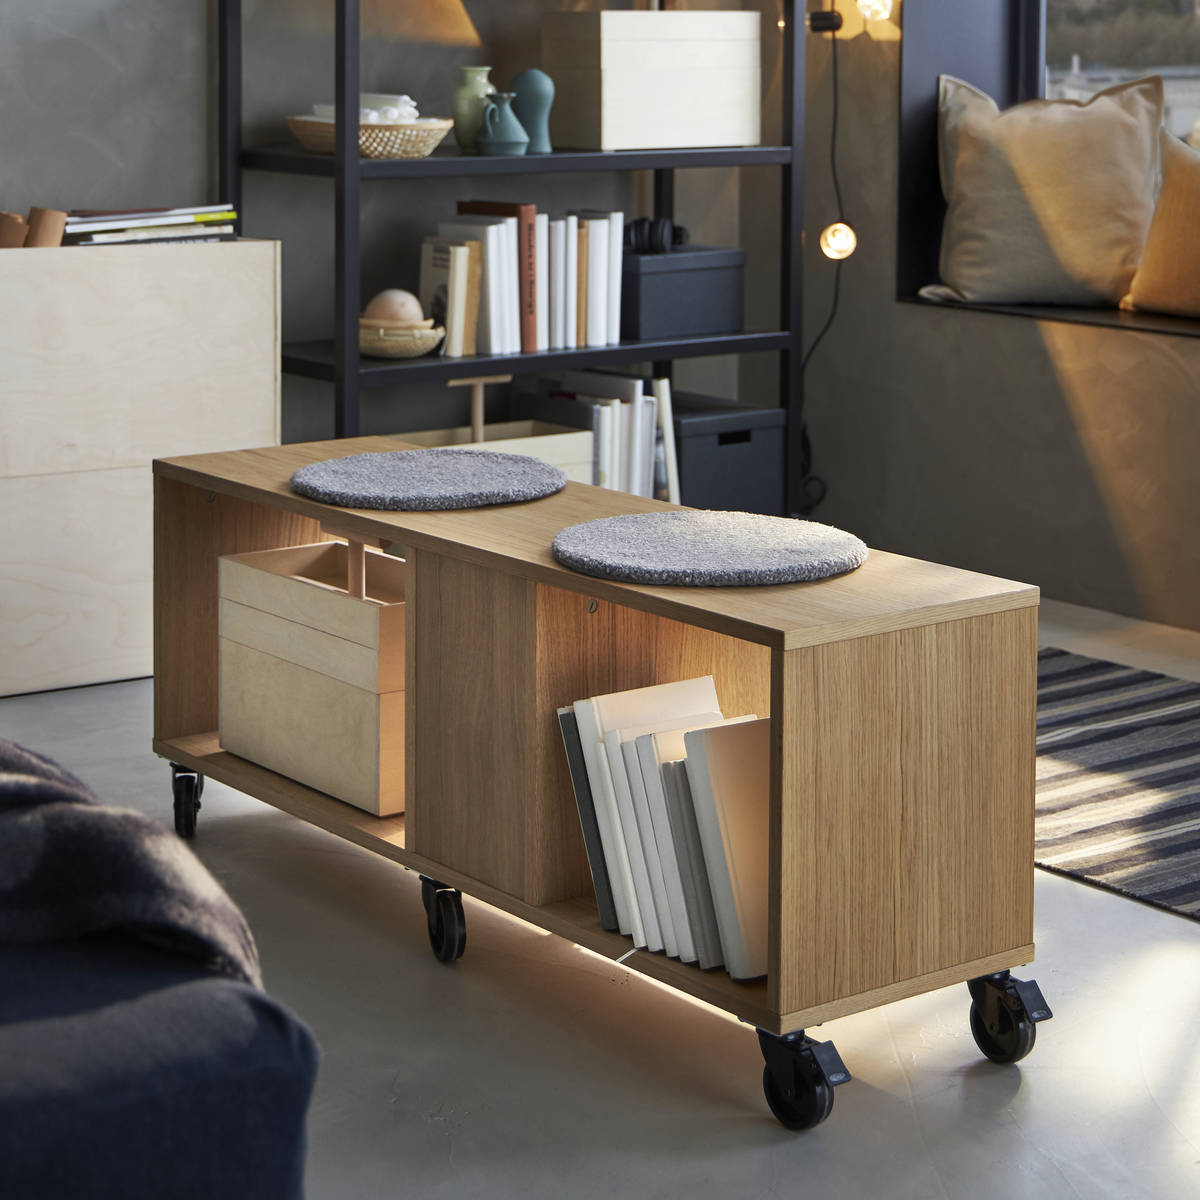 The Ravaror storage bench is on castors so you can roll it where you want it. Need room to danc ...